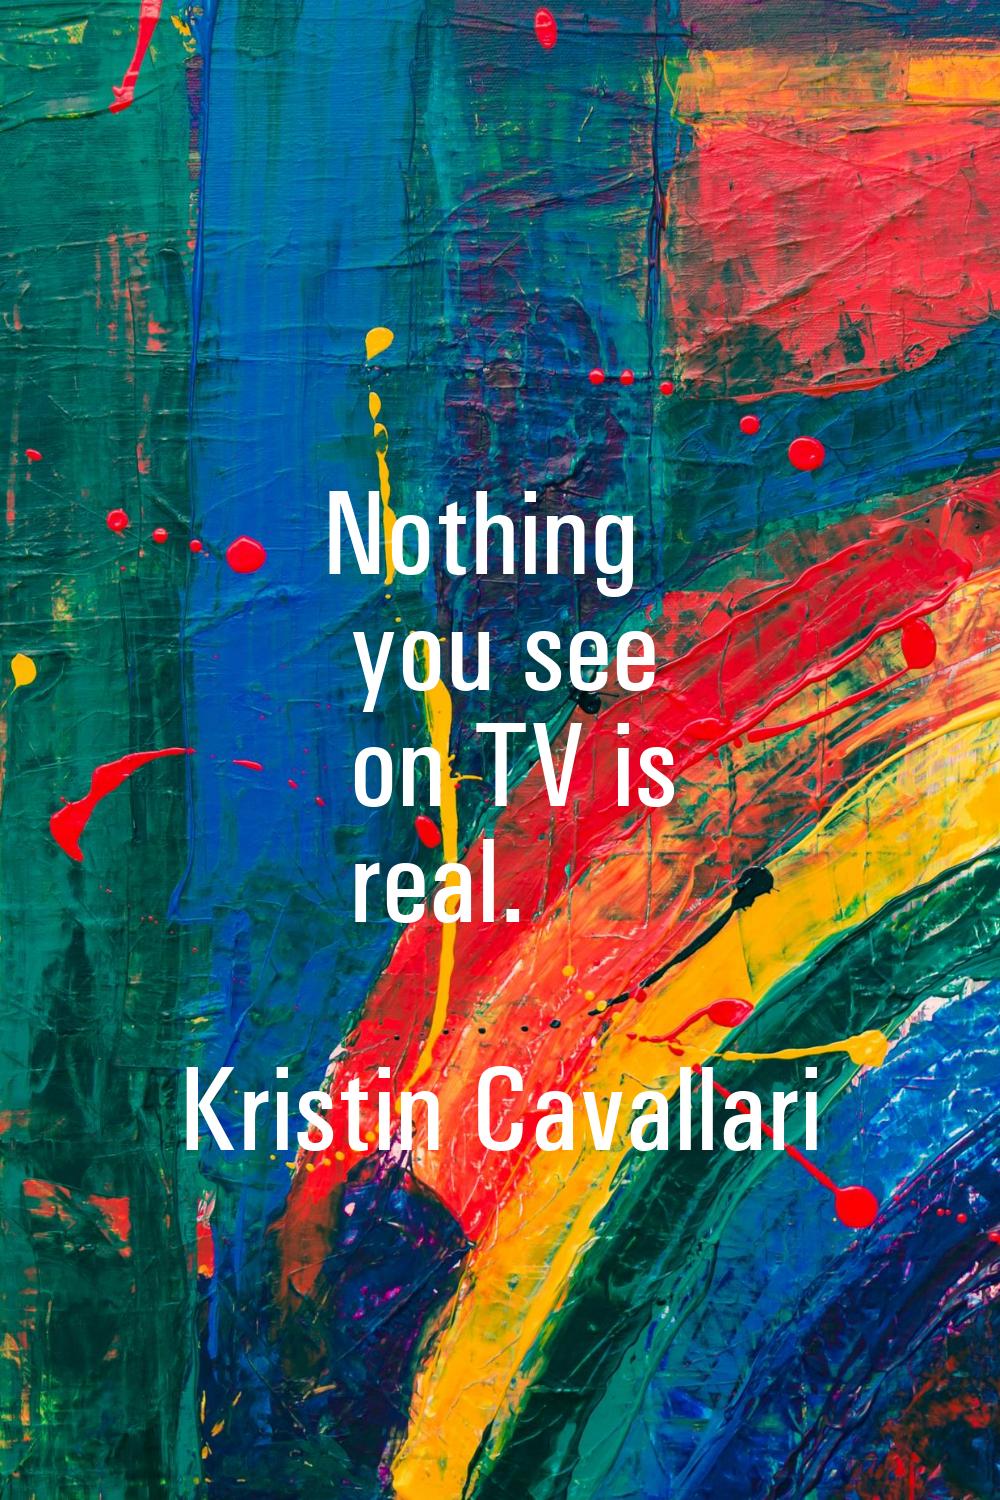 Nothing you see on TV is real.